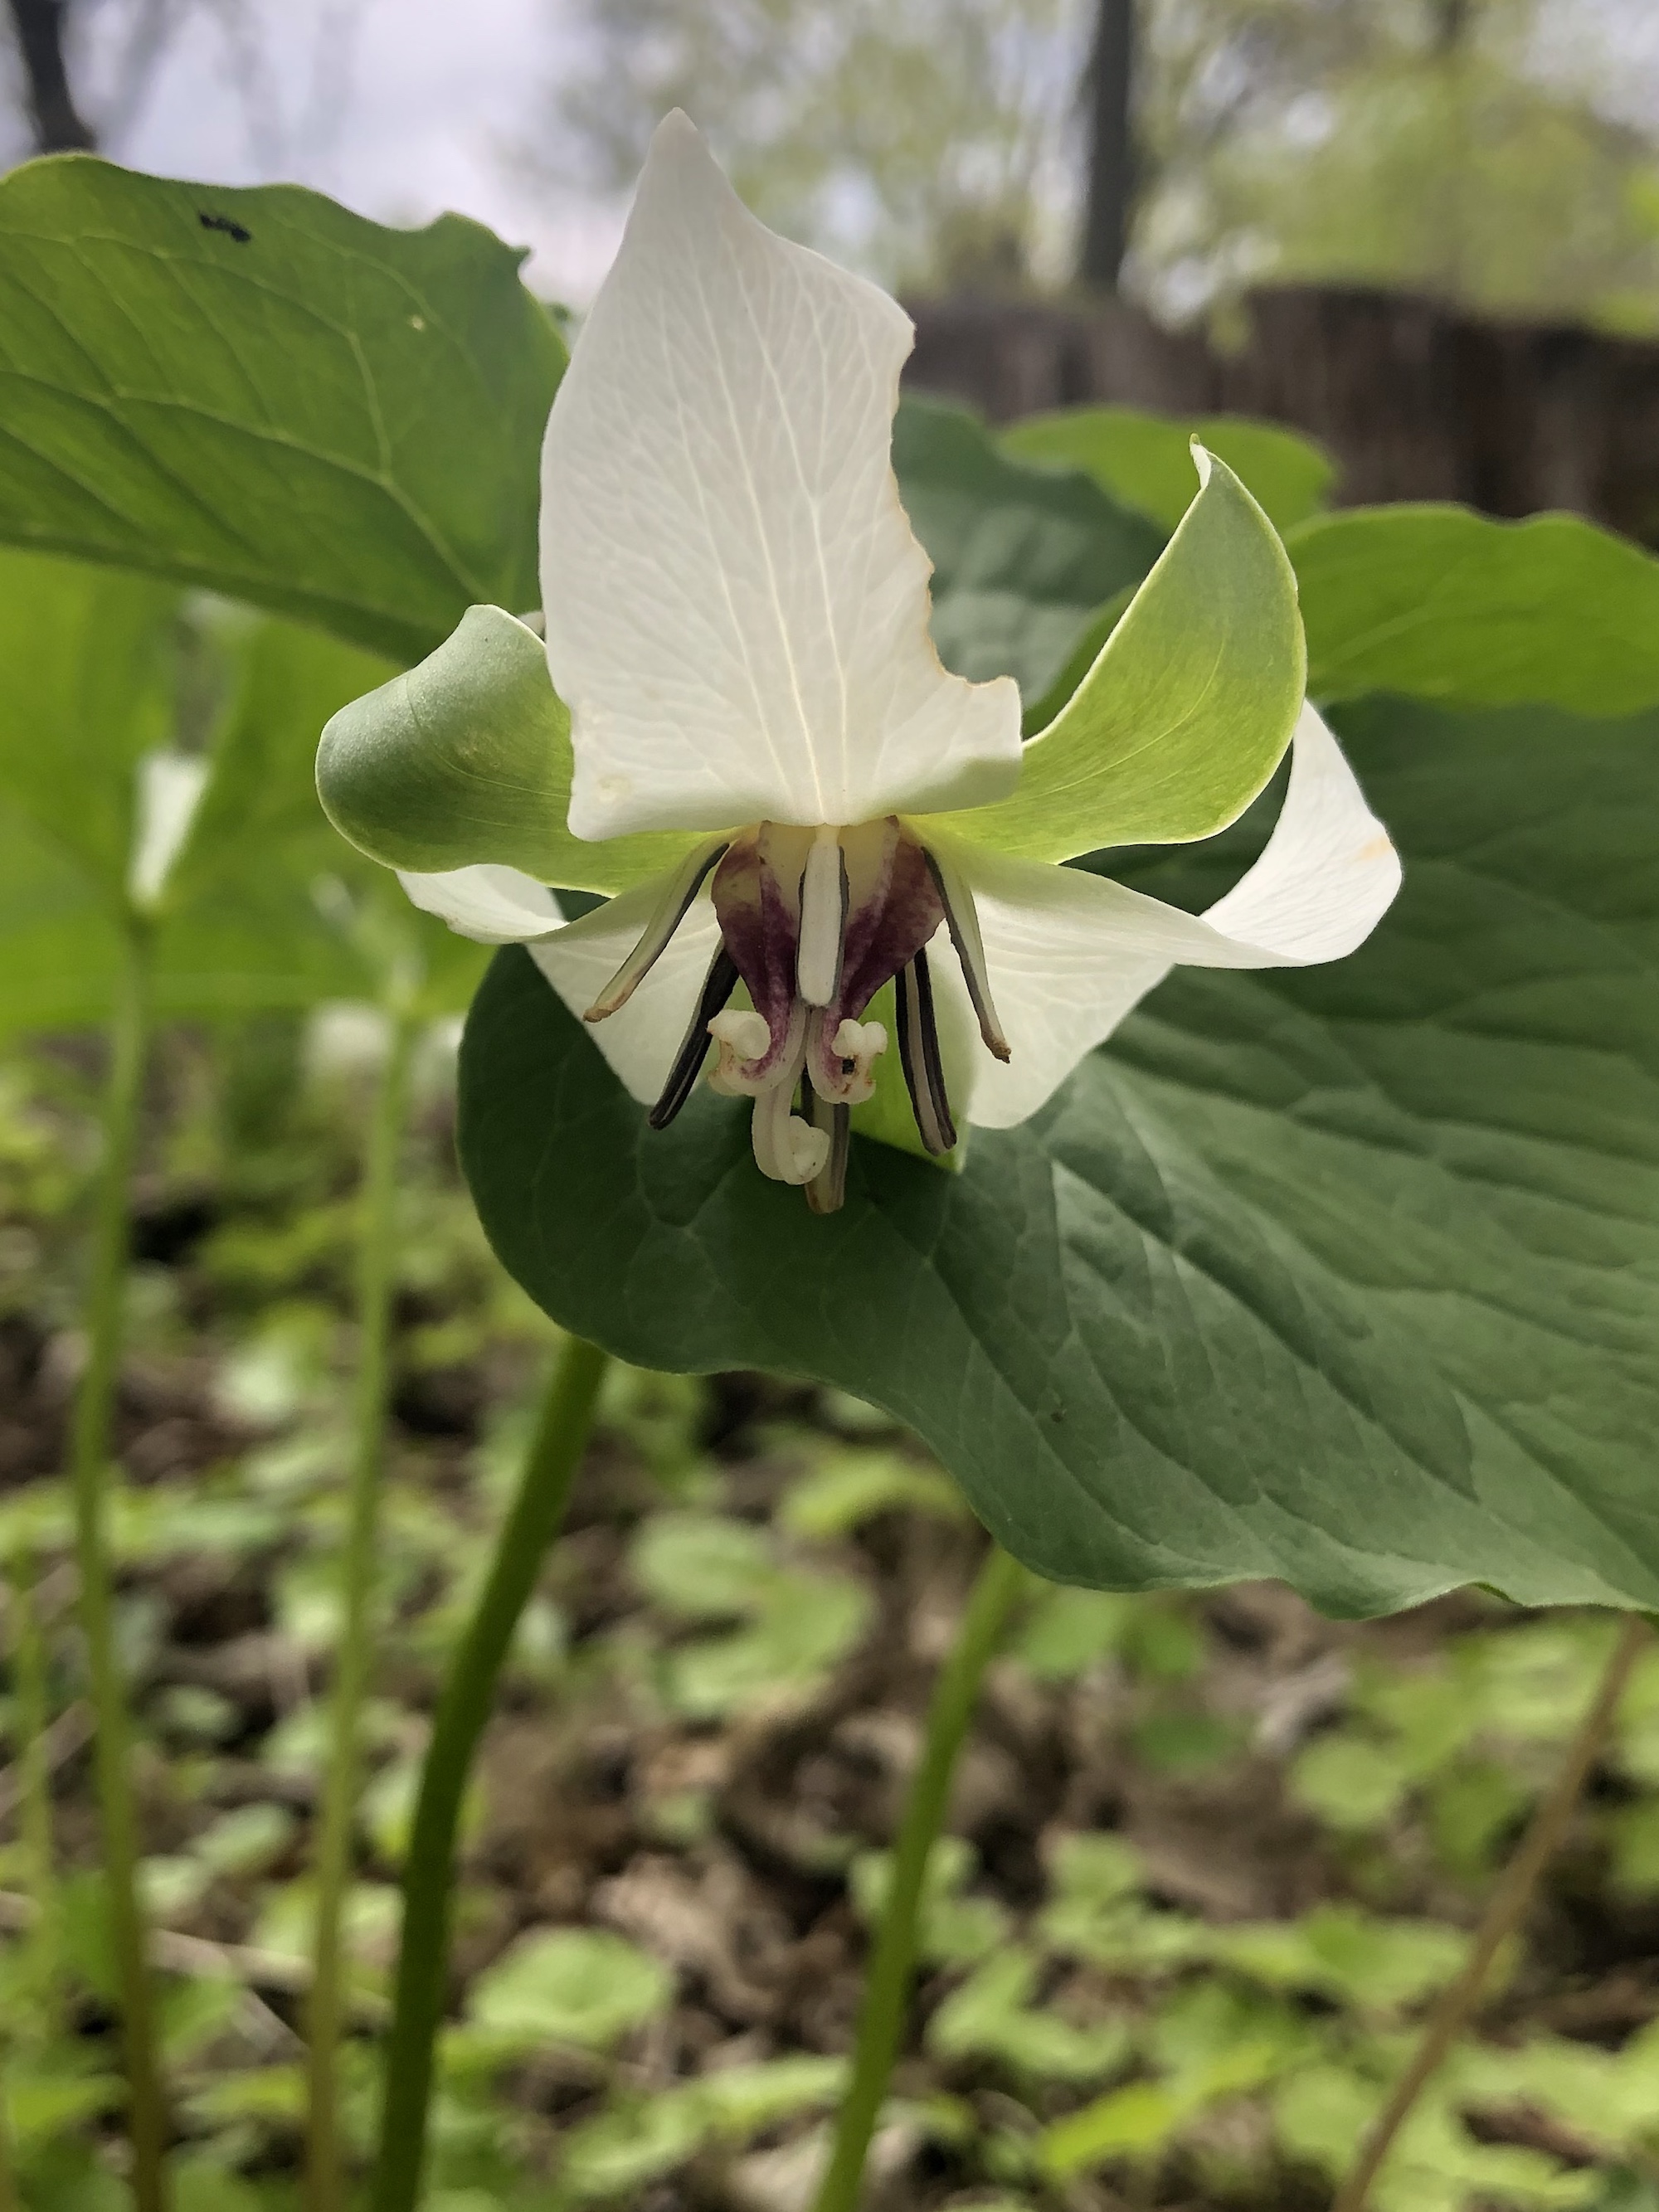 Drooping Trillium near Council Ring Spring in Madison, Wisconsin on May 10, 2021.